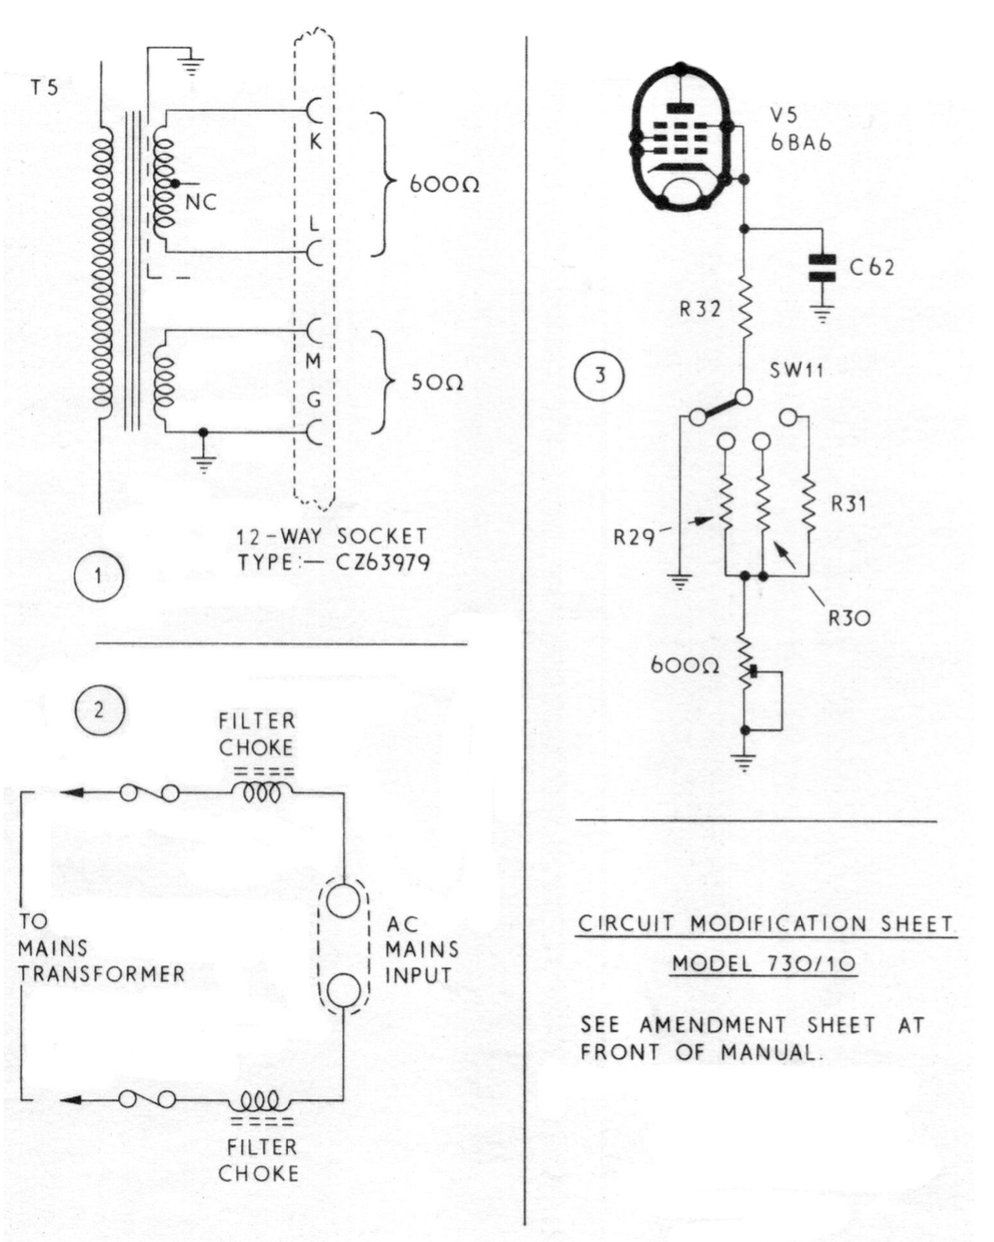 Eddystone Type 730-10 Communications receiver - Circuits Modification